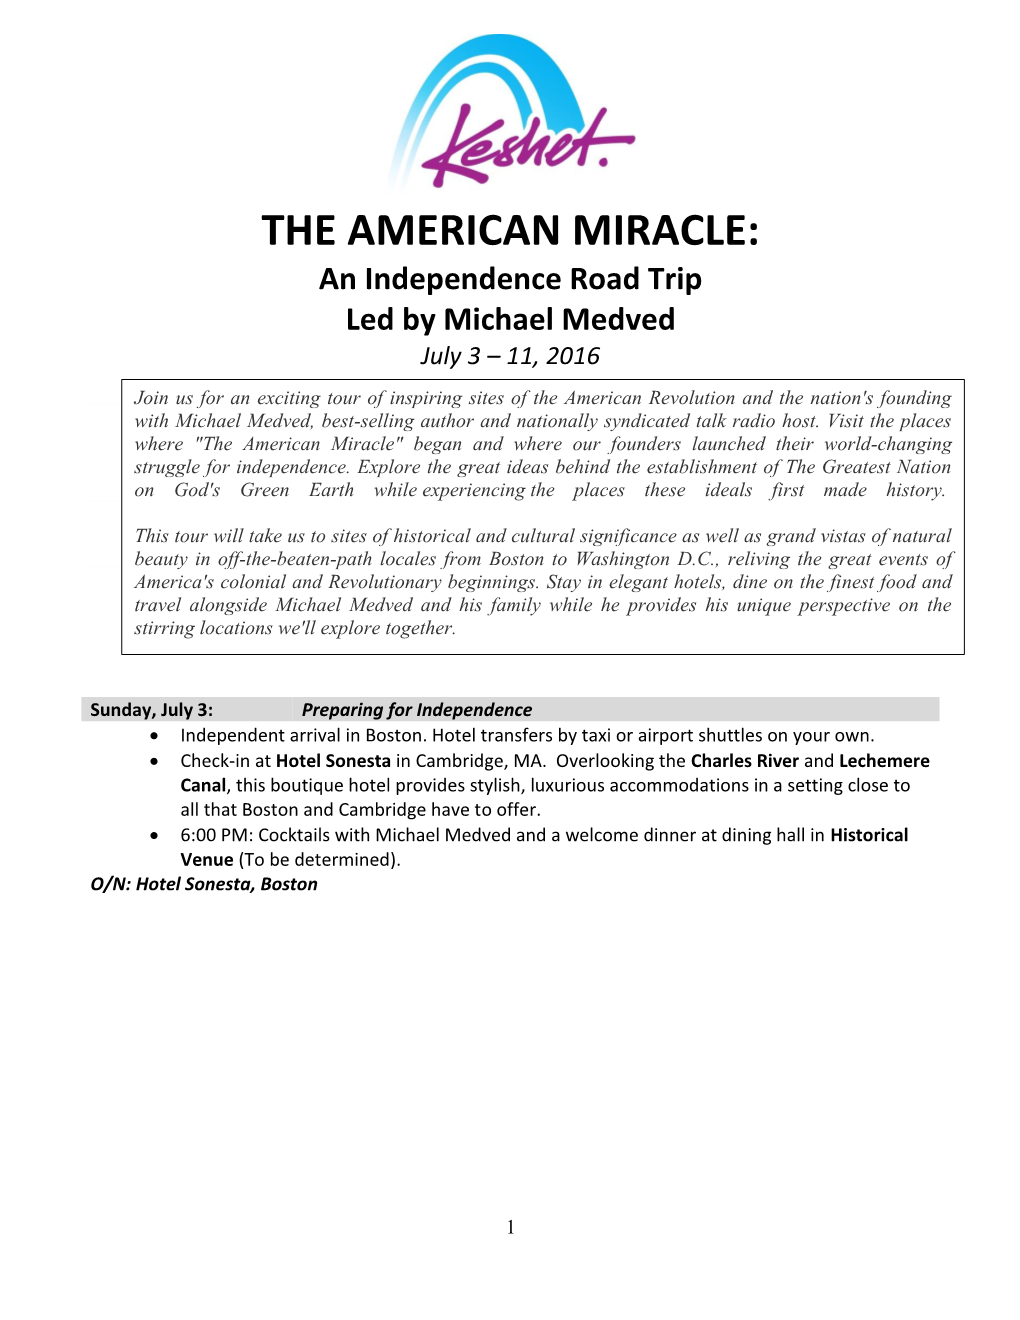 The American Miracle